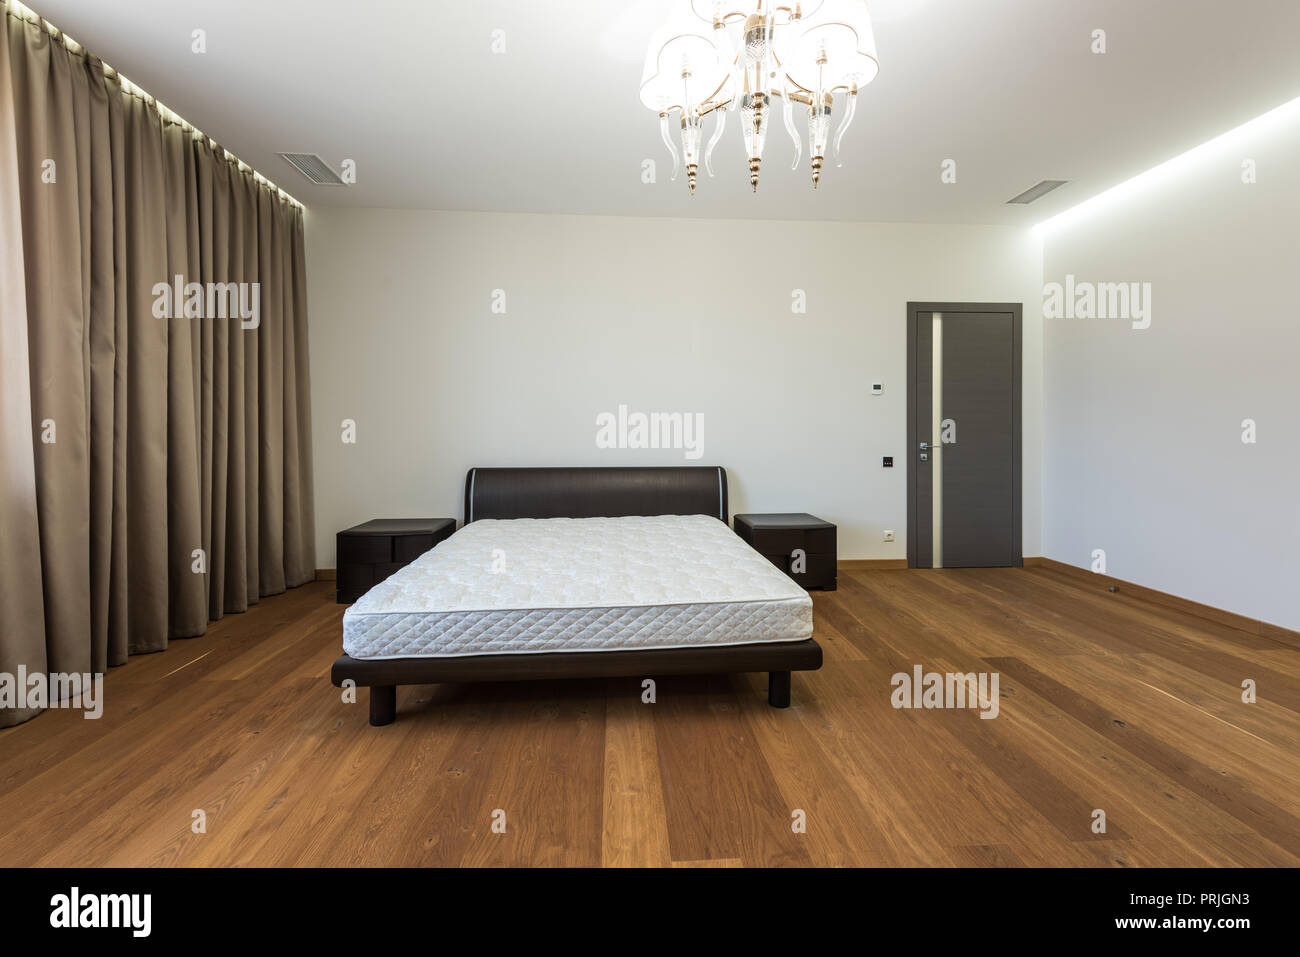 interior of empty bedroom with curtains and mattress on bed Stock Photo